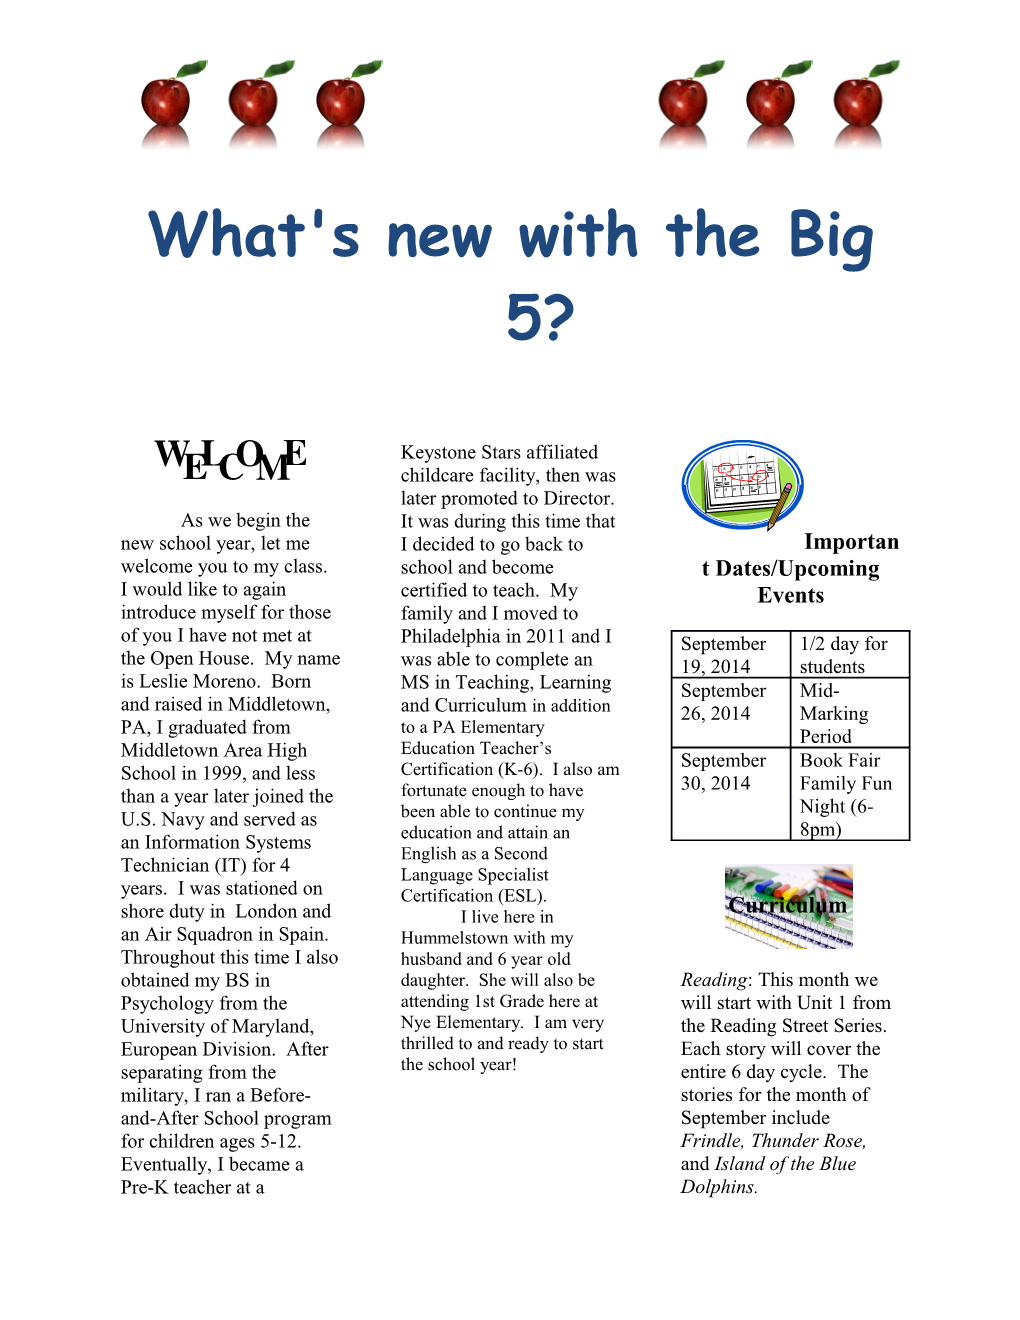 What's New with the Big 5?